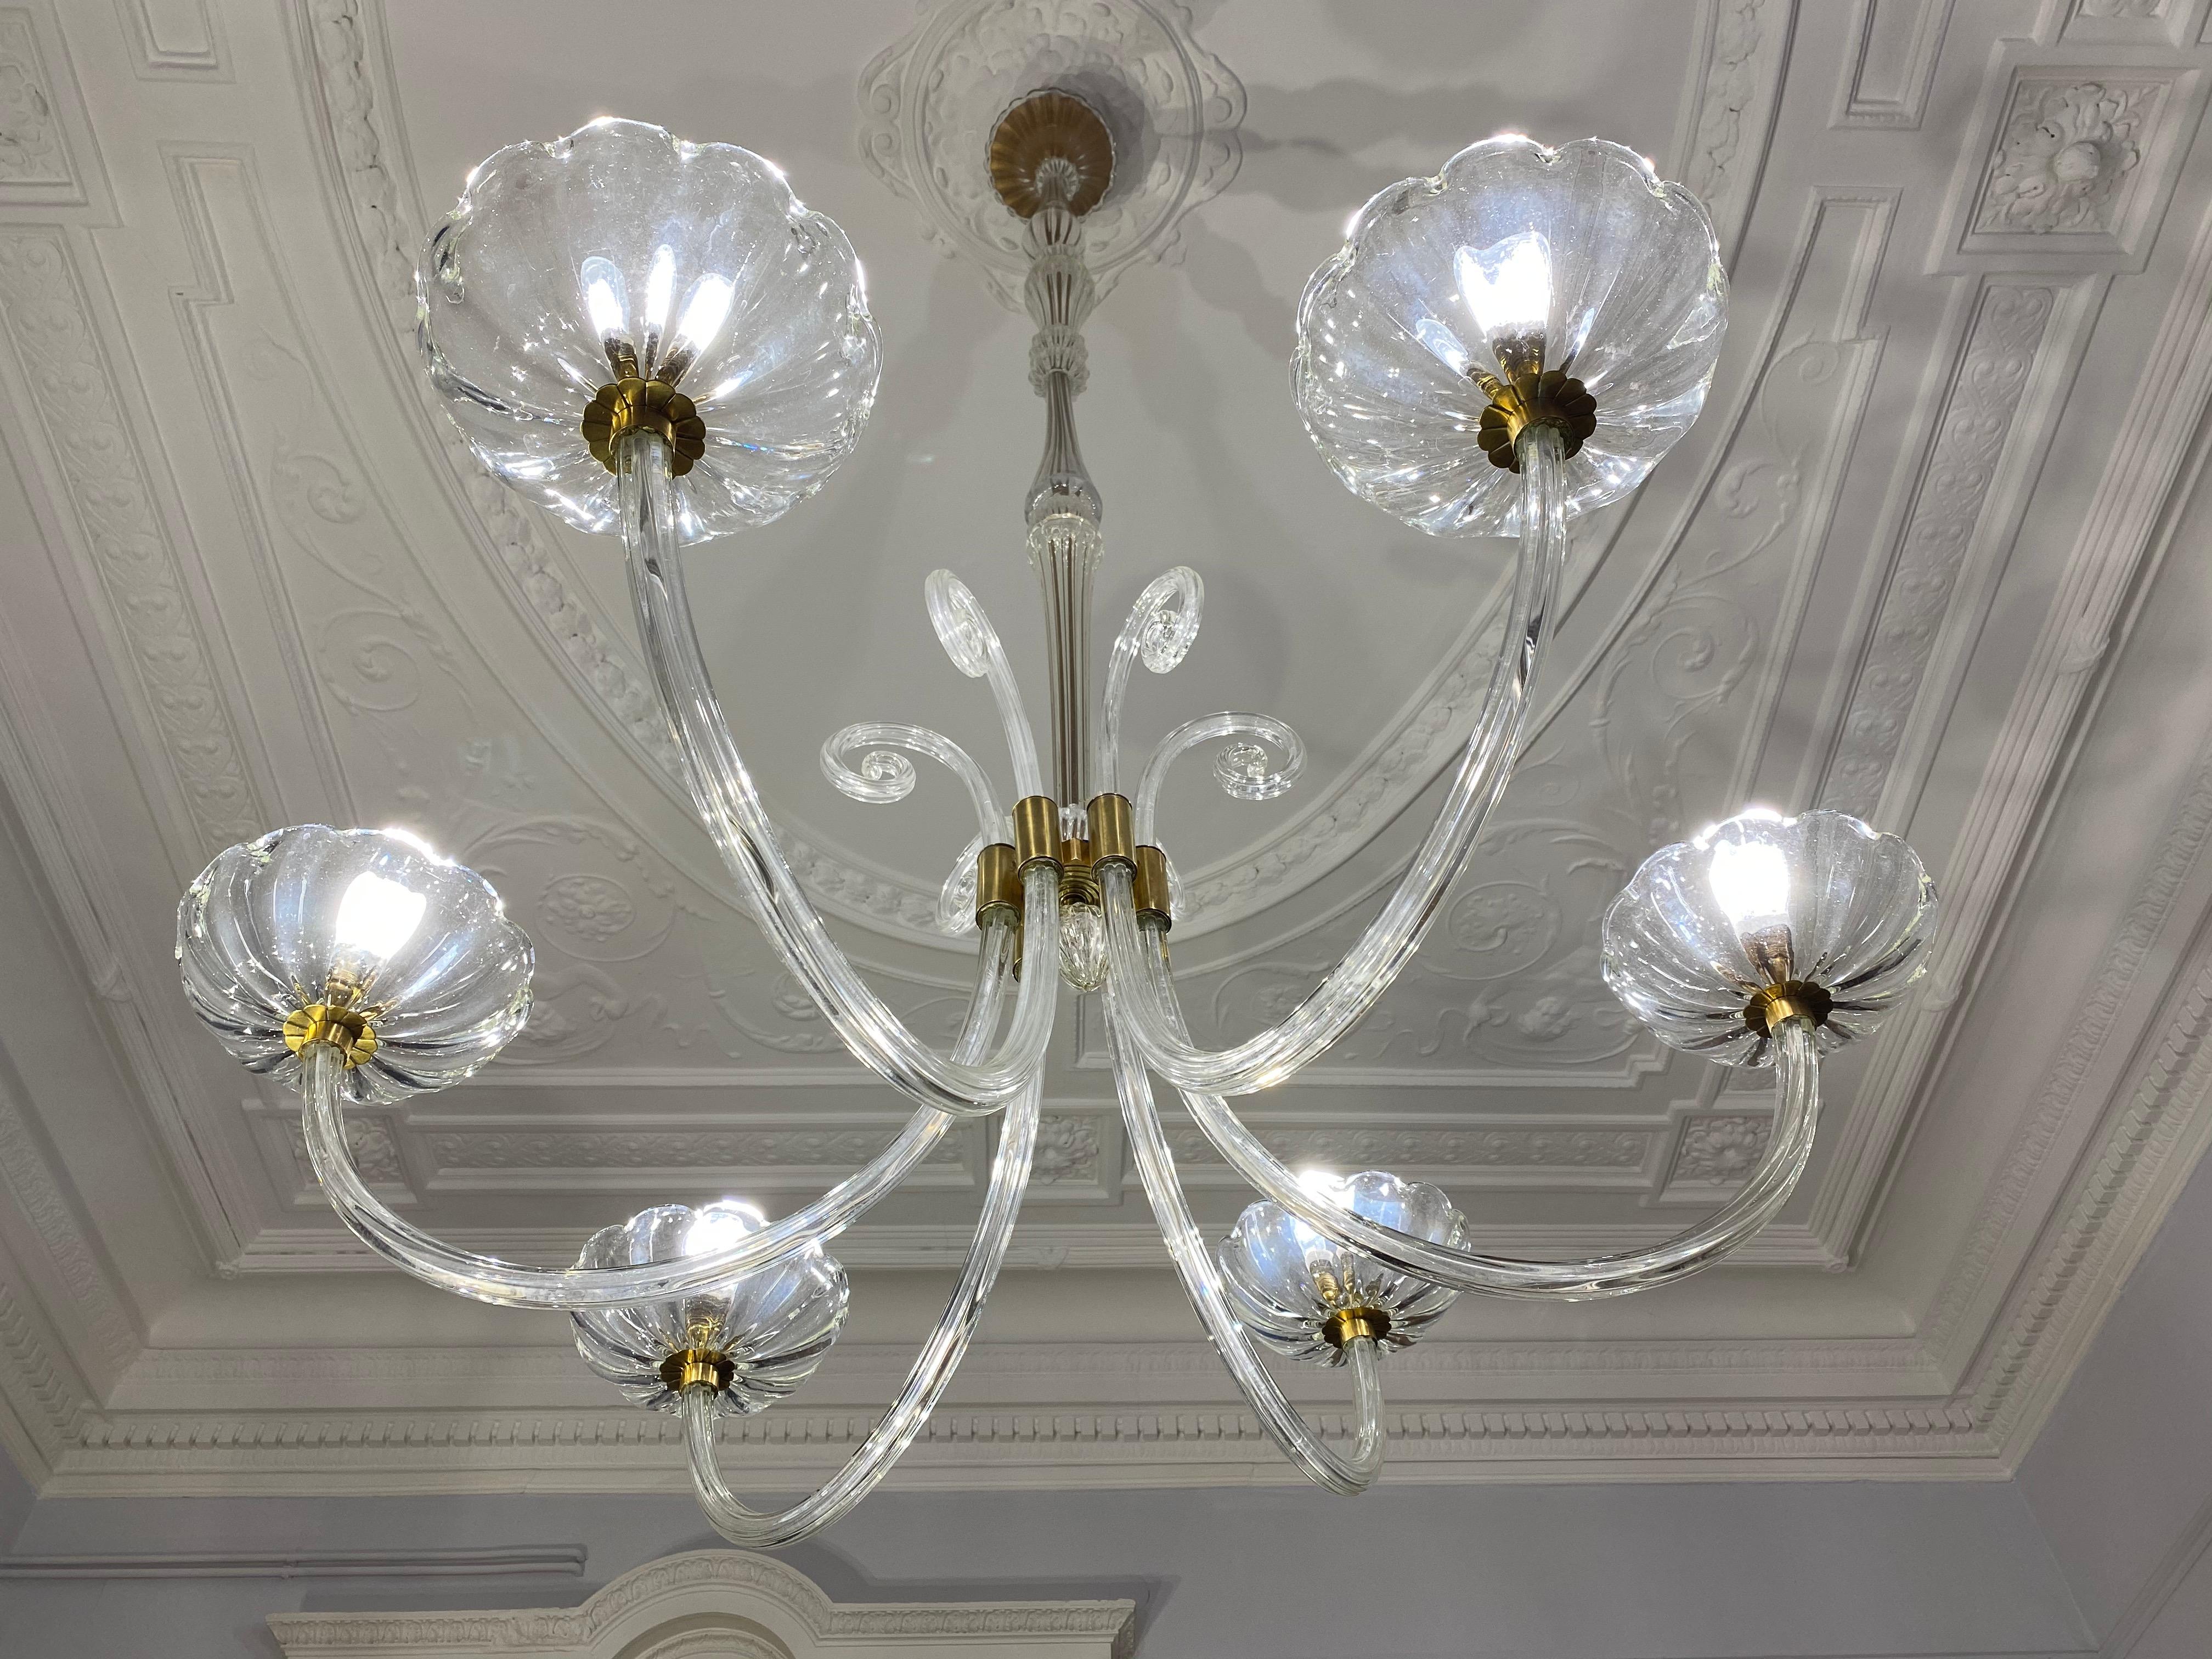 Amazing and elegant hand blown Murano chandelier by Ercole Barovier, circa 1940.
Measure: Diameter cm 120
Height cm 215
From Private collection.